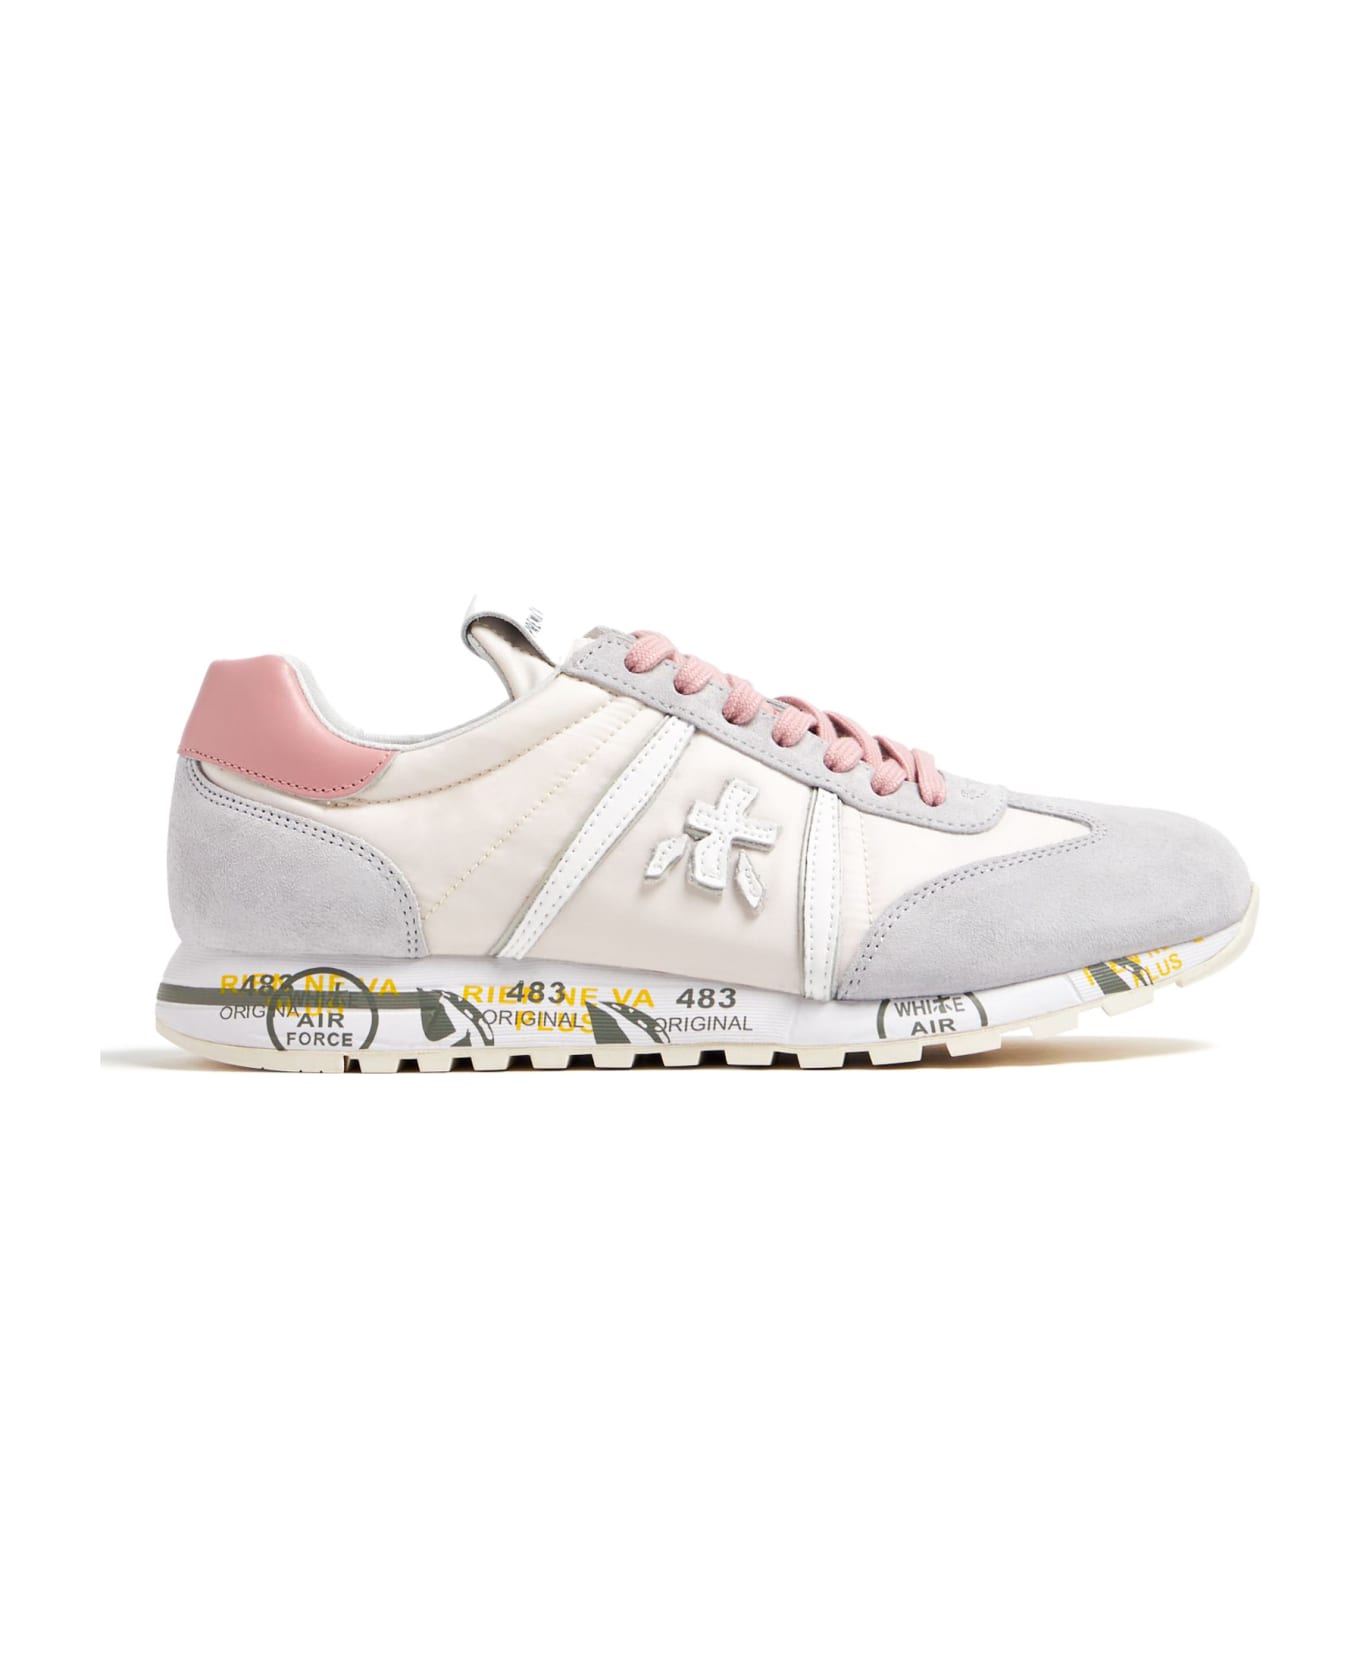 Premiata Lucy Sneakers - Pink スニーカー